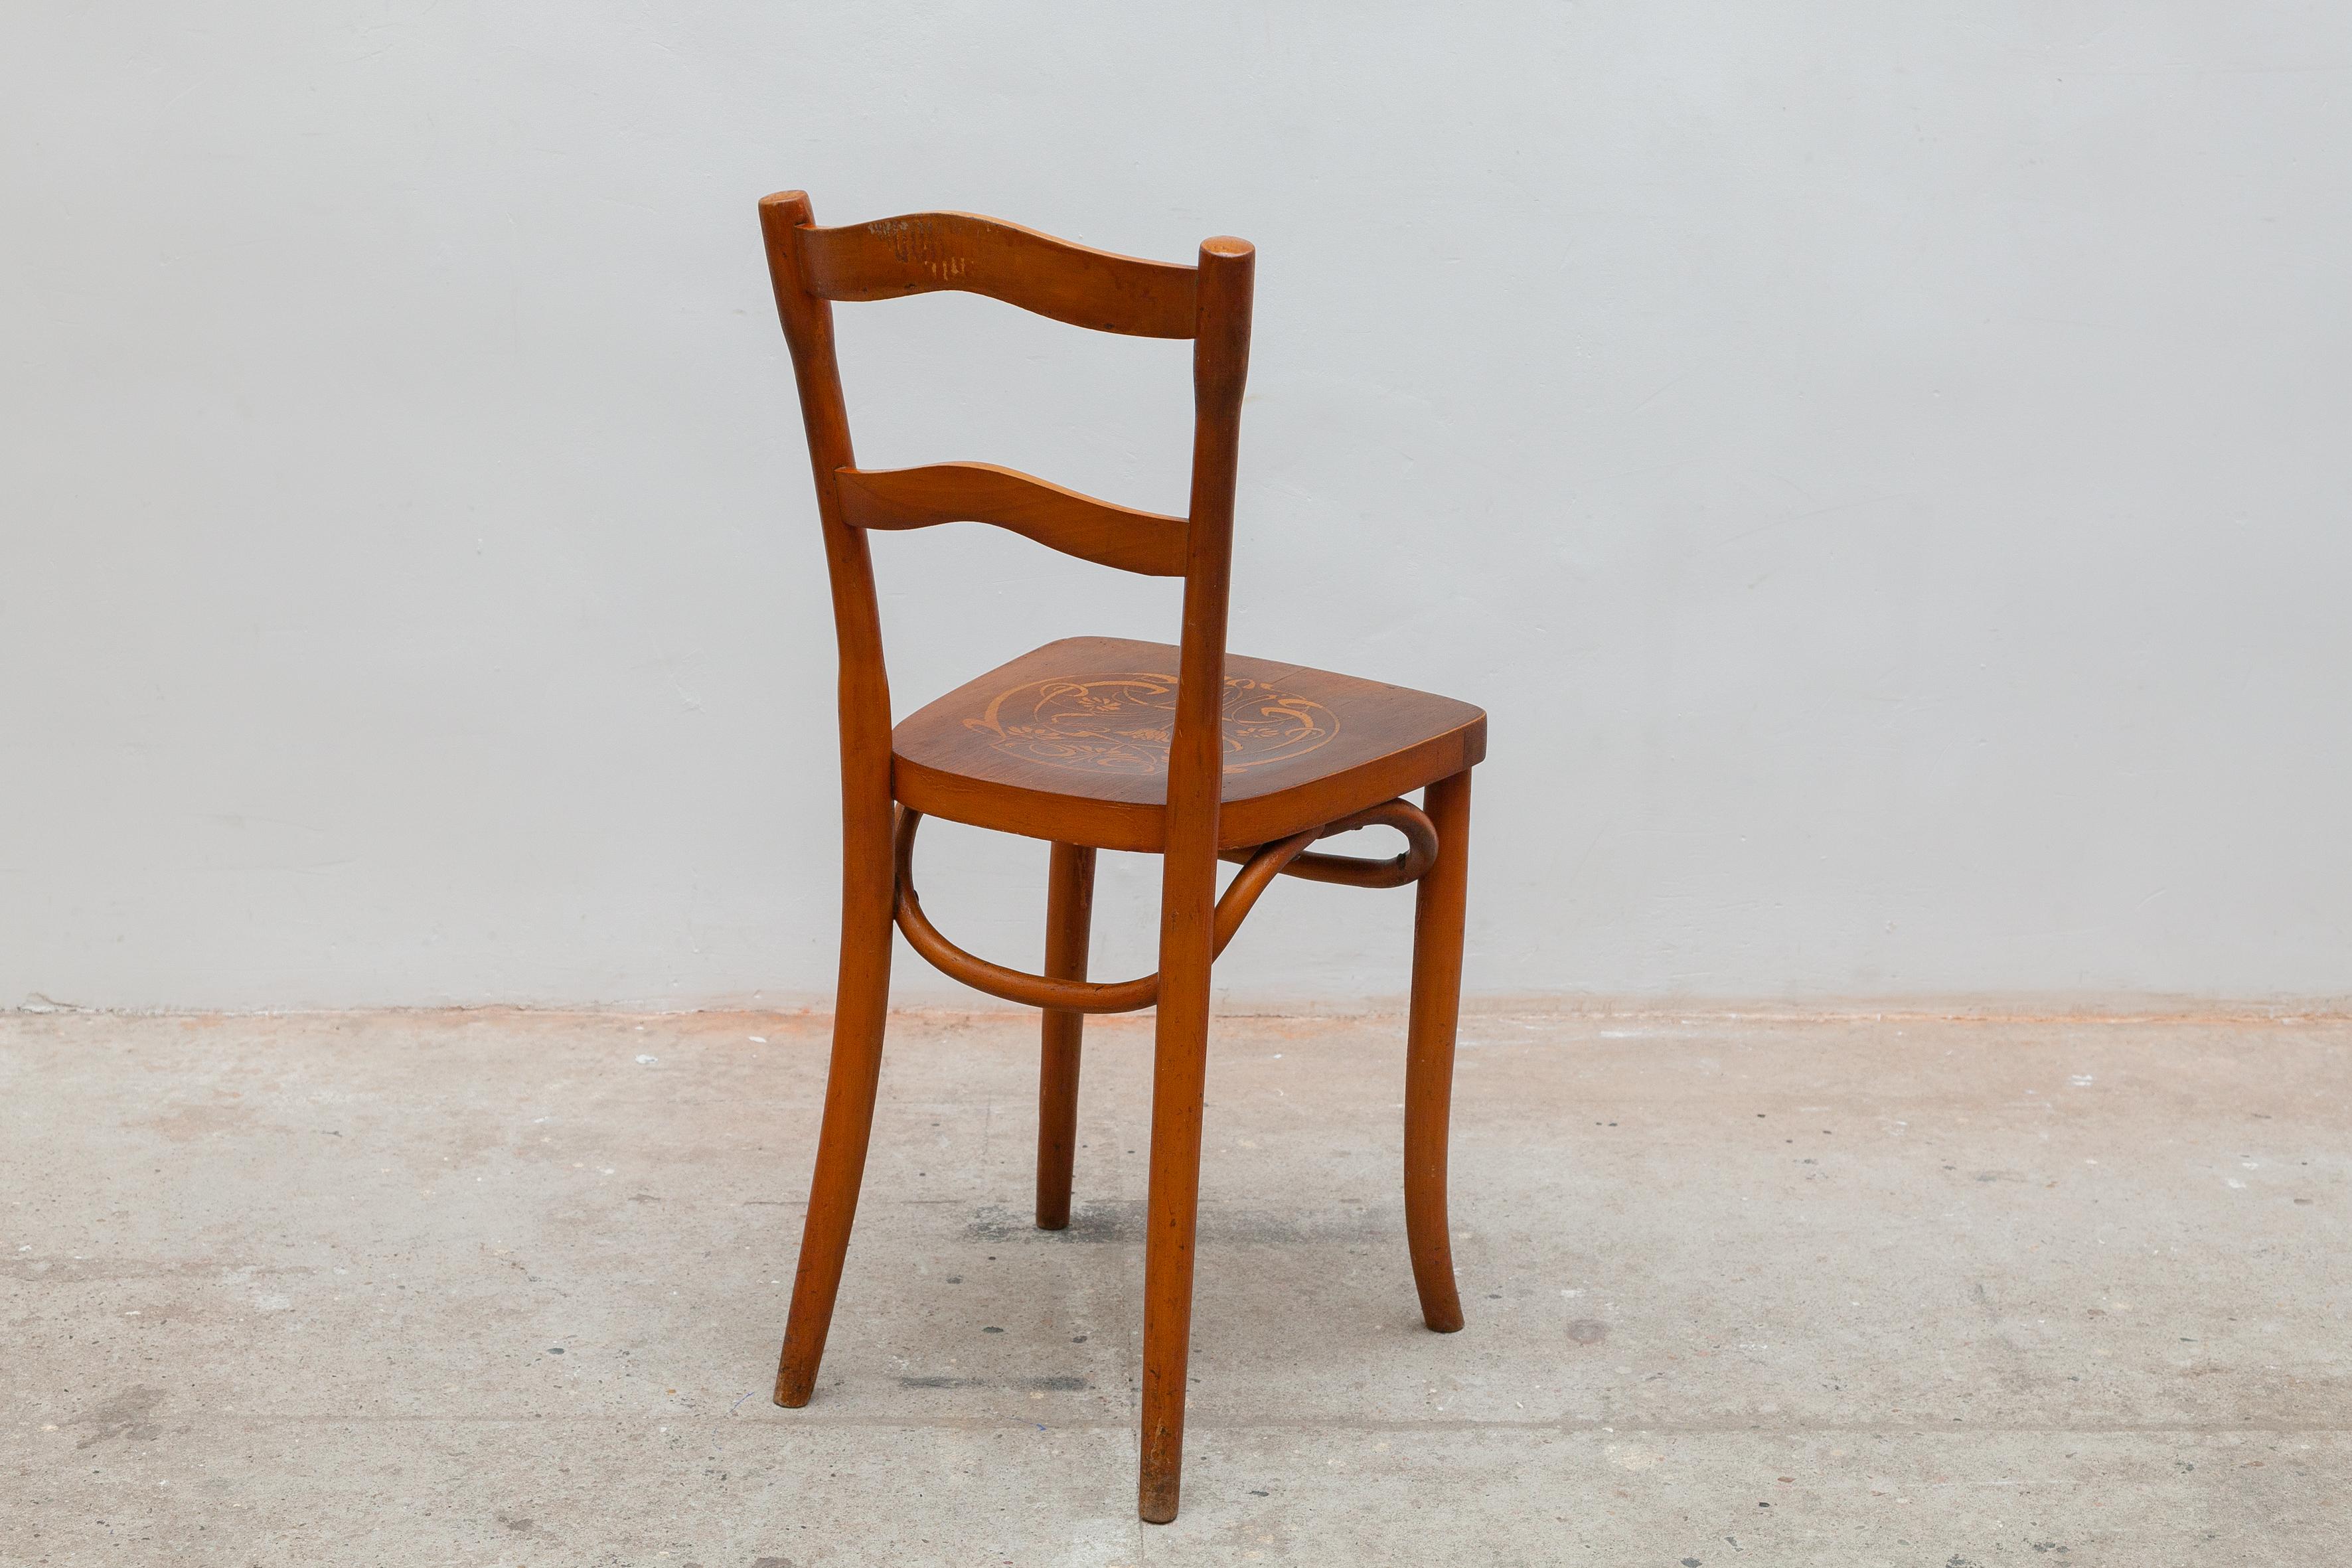 Hand-Crafted Art Nouveau Side Chair Designed by Thonet, Austria, 1910 For Sale